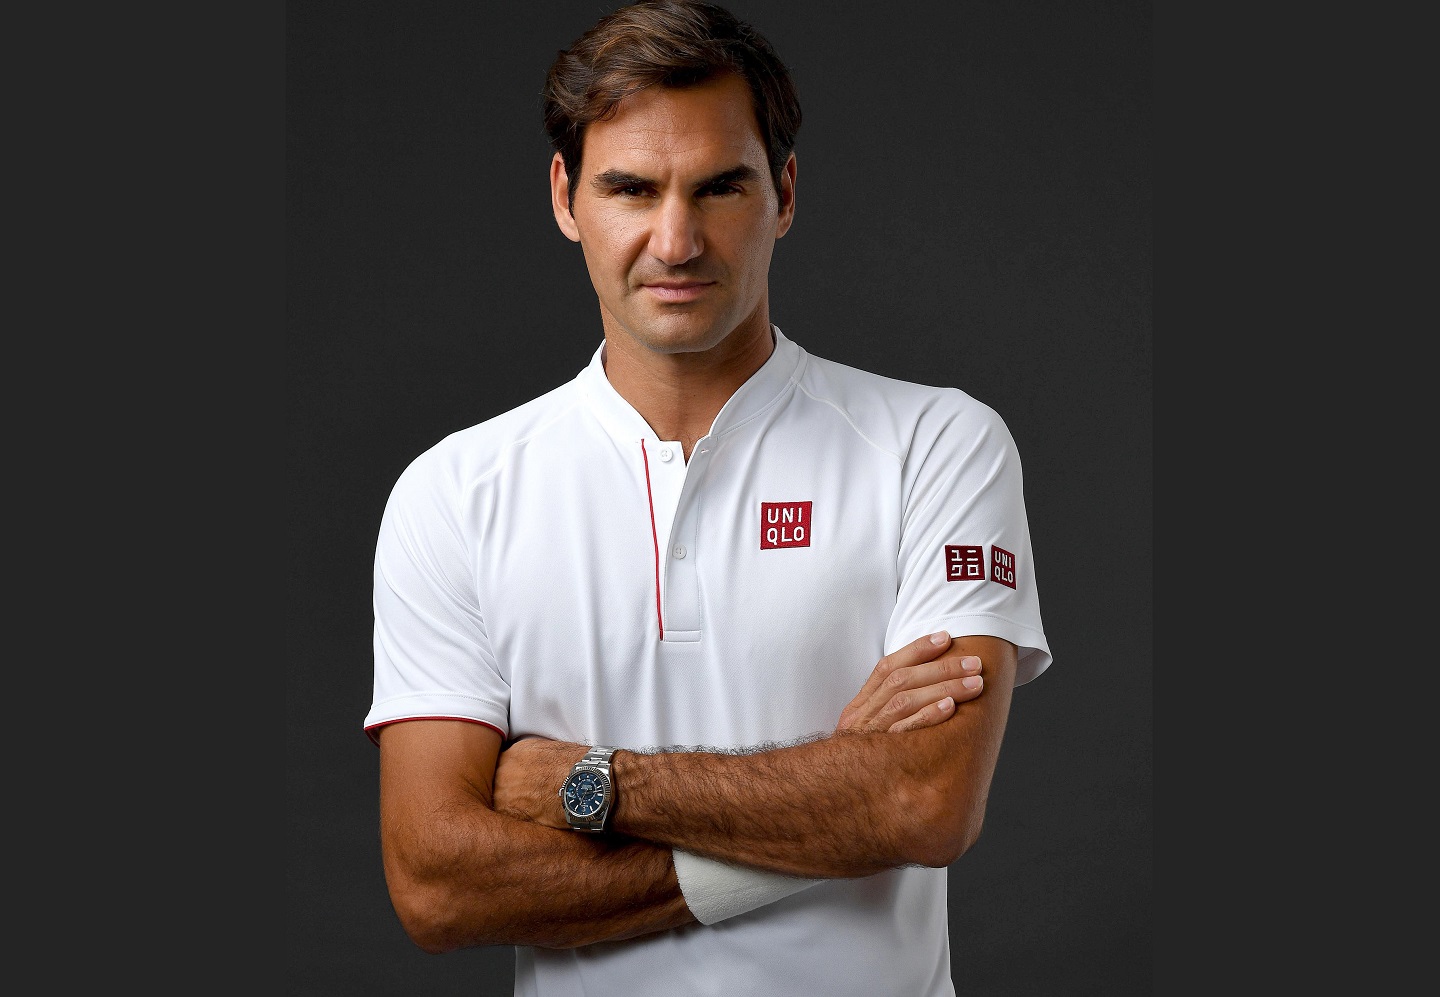 Roger Nike for Uniqlo | Options, The